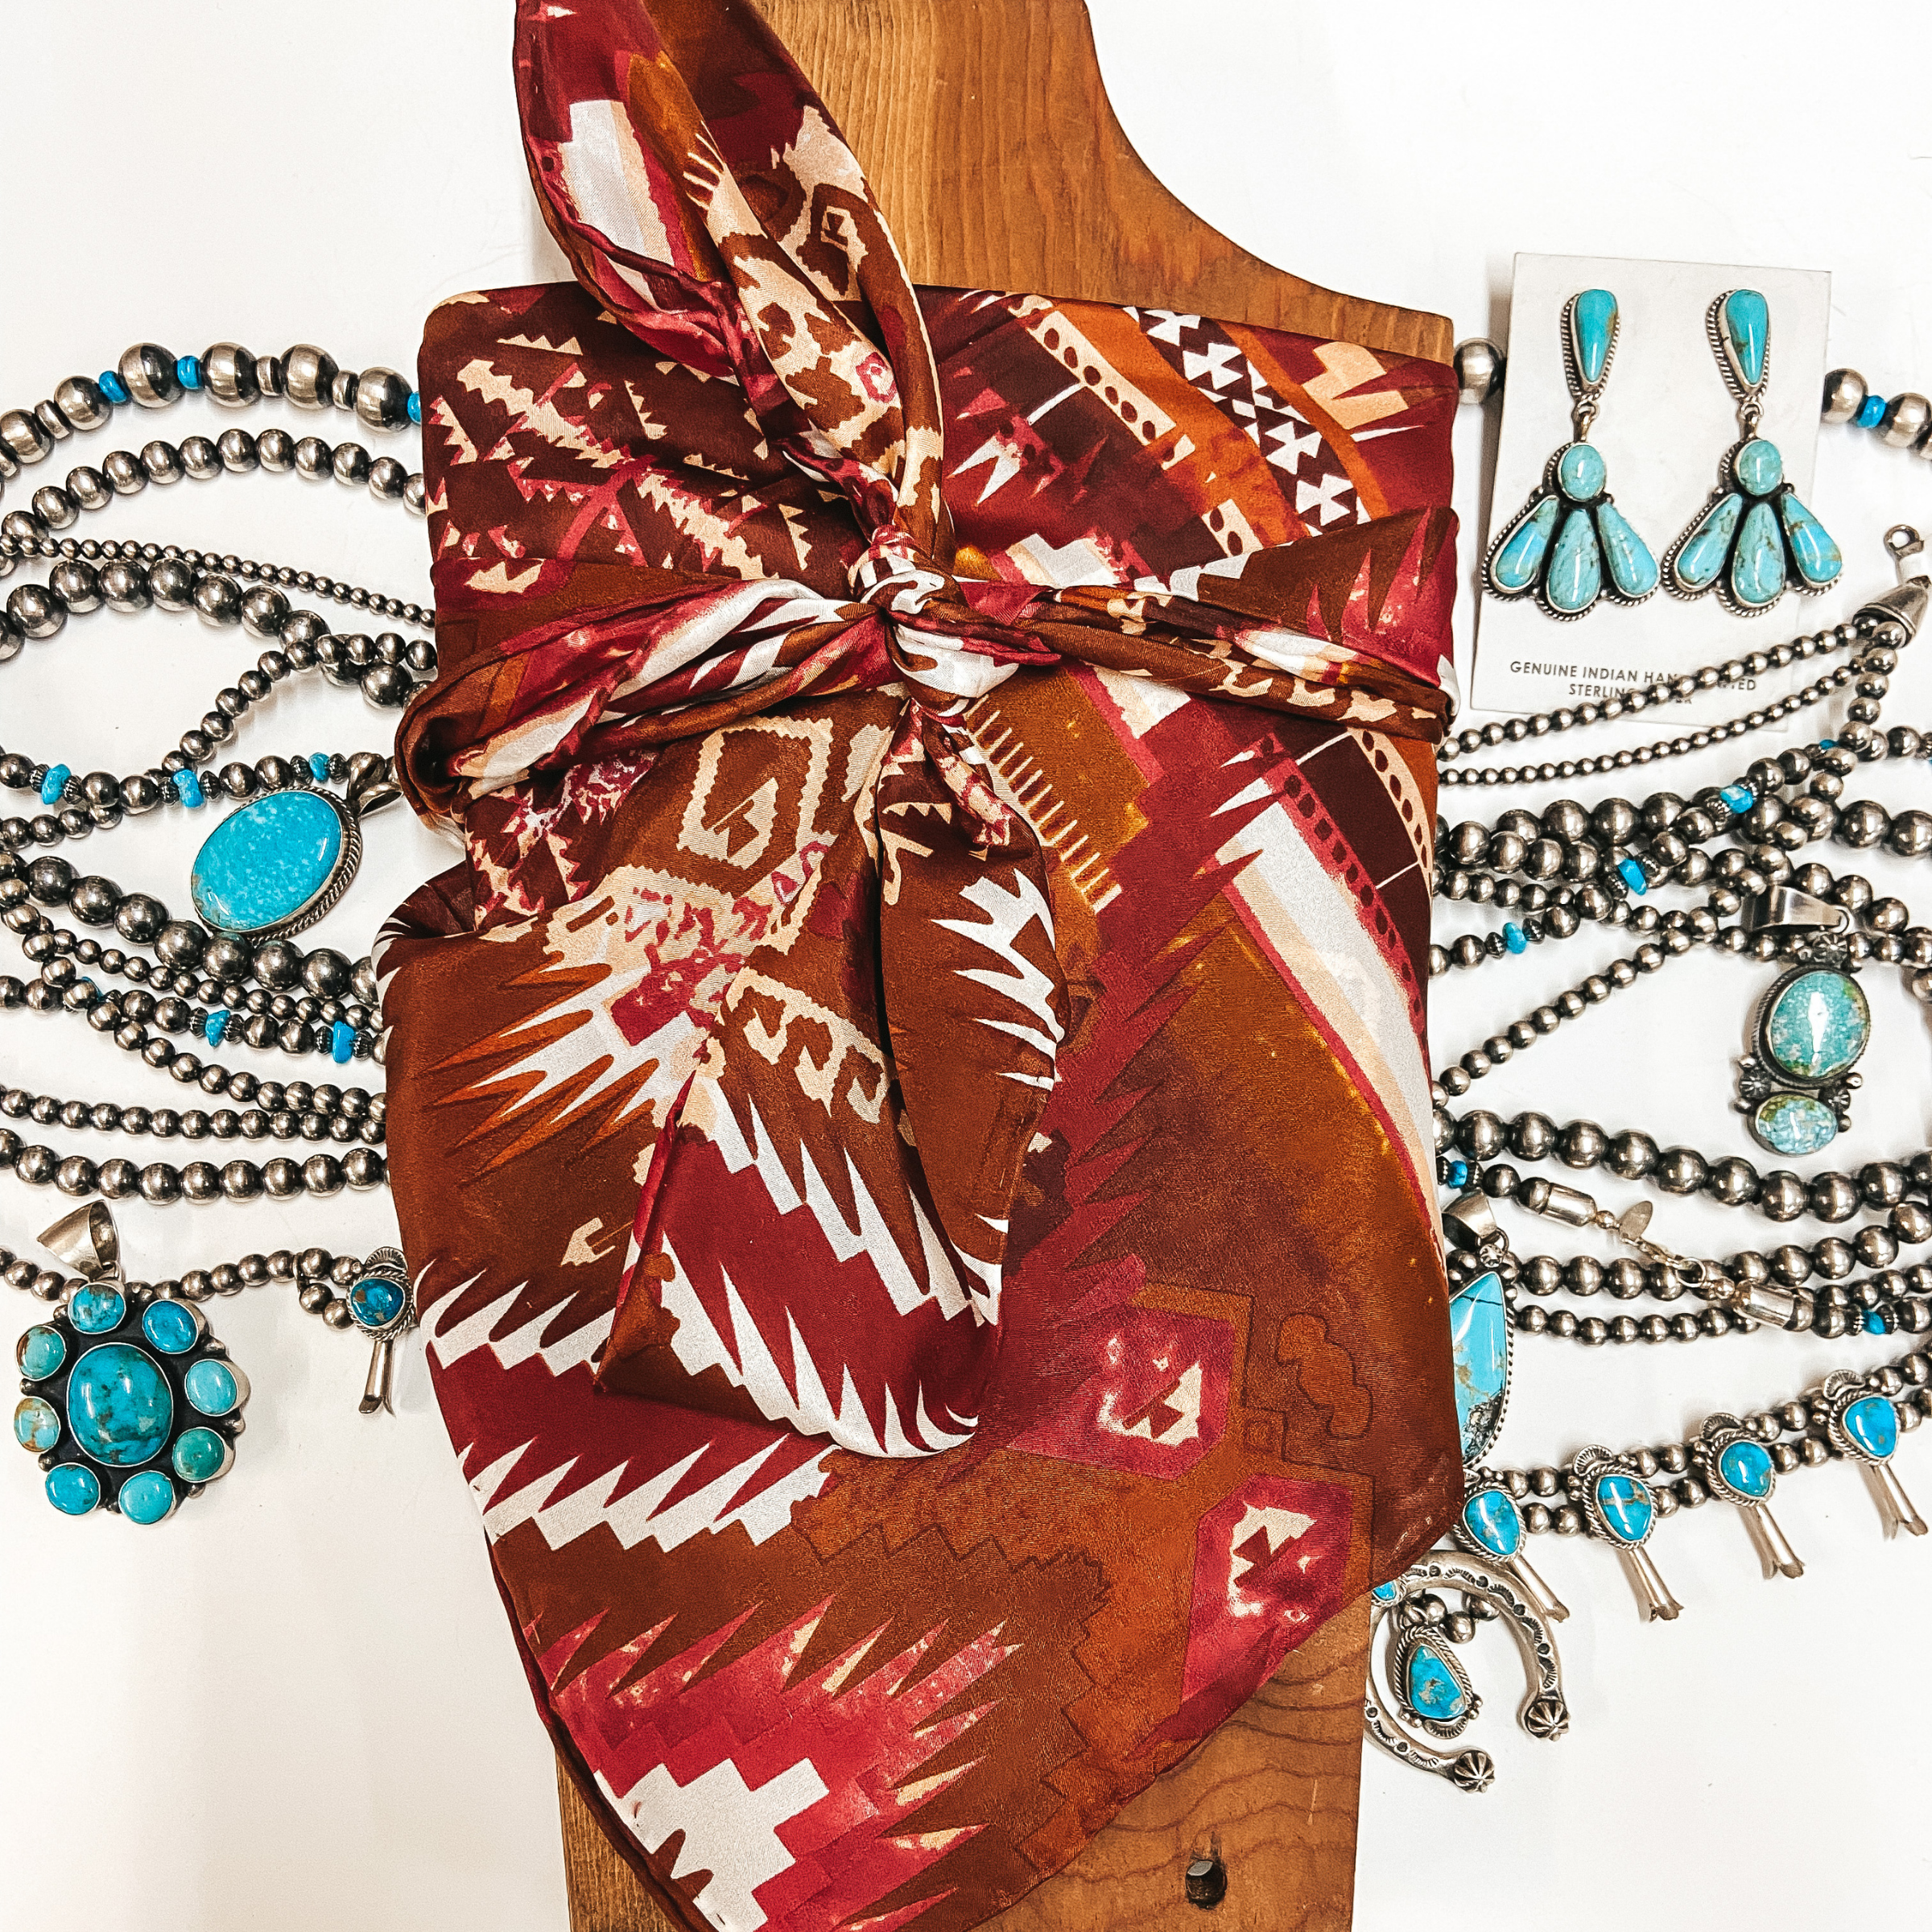 An Aztec print scarf with red, brown, and white colors. Scarf is tied around a wooden display with turquoise and silver jewelry.